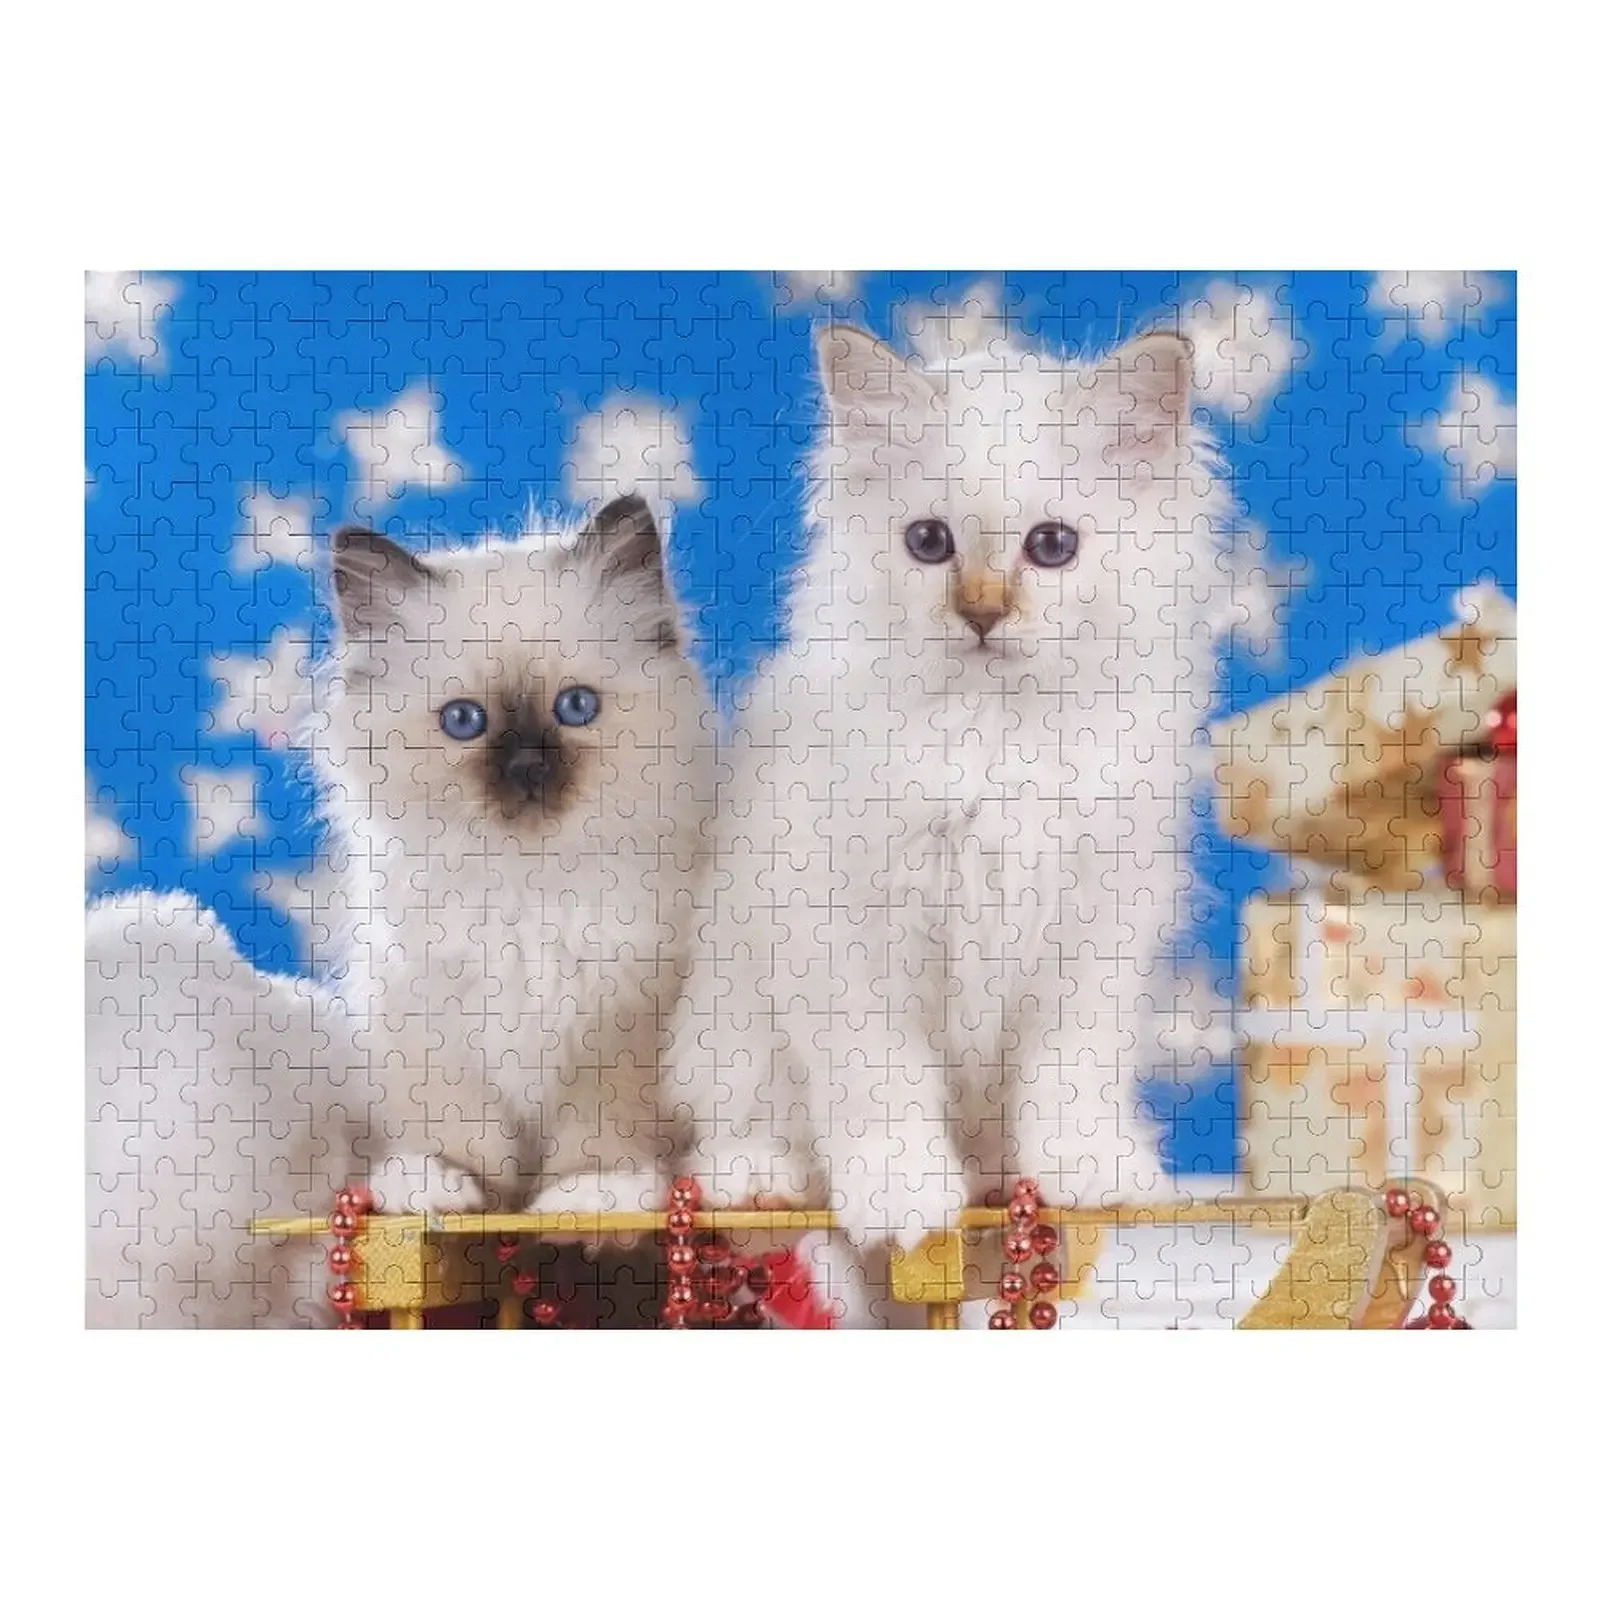 Cute holy Burma kitten wish Merry Christmas animal cats puzzle Jigsaw Puzzle Custom Child Gift Customs With Photo Puzzle 6pc christmas card a for all series message holiday wish card christmas envelope creative letter paper thank you card stationery